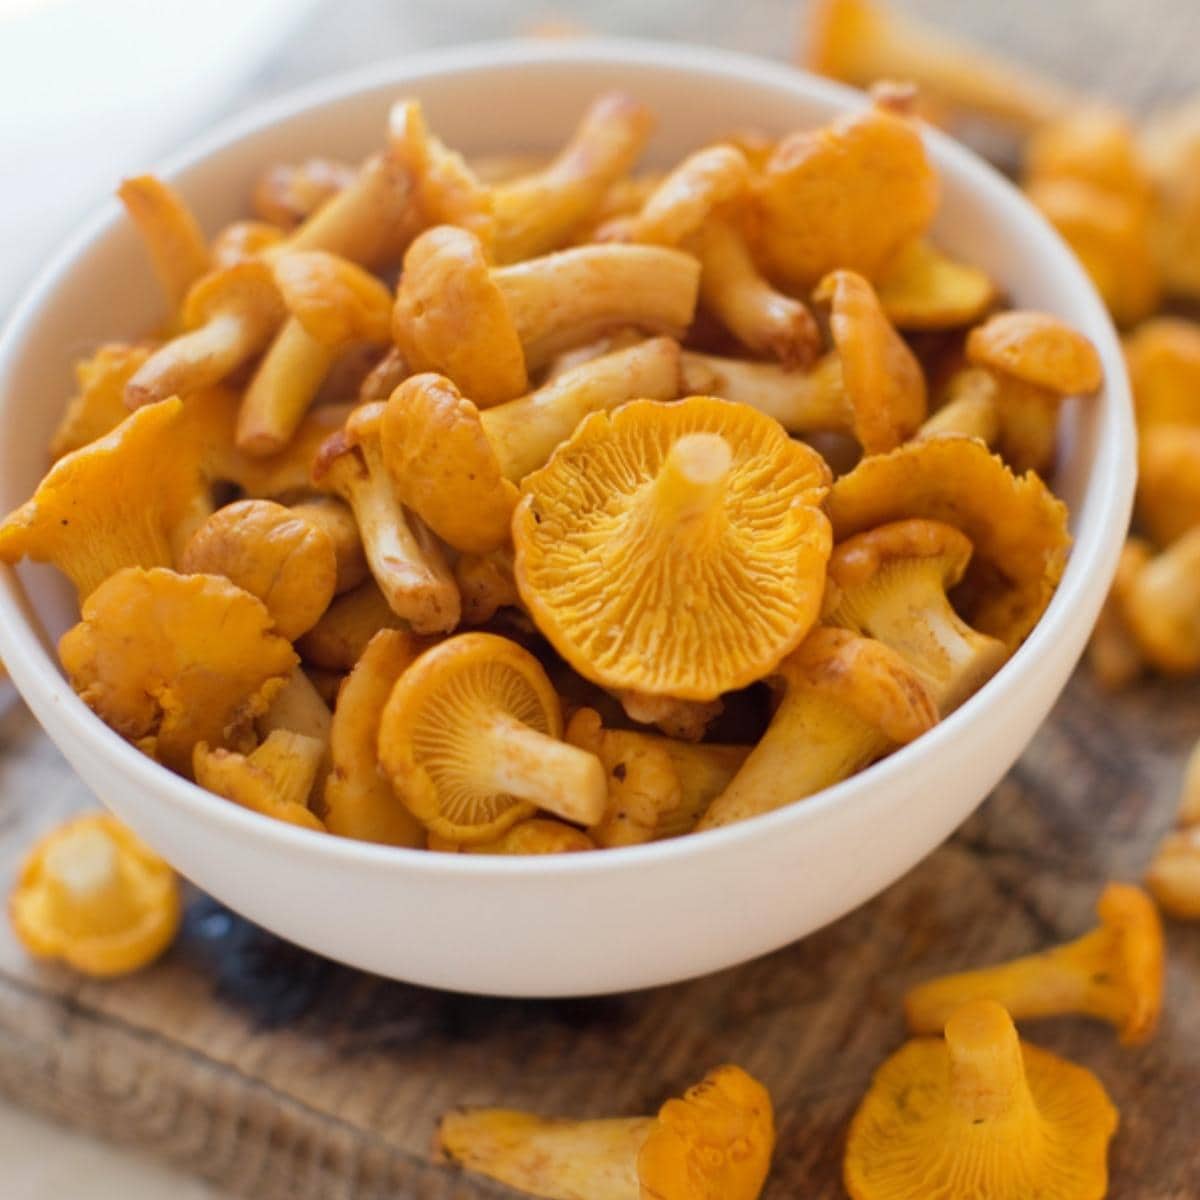 Bowl filled with chanterelles